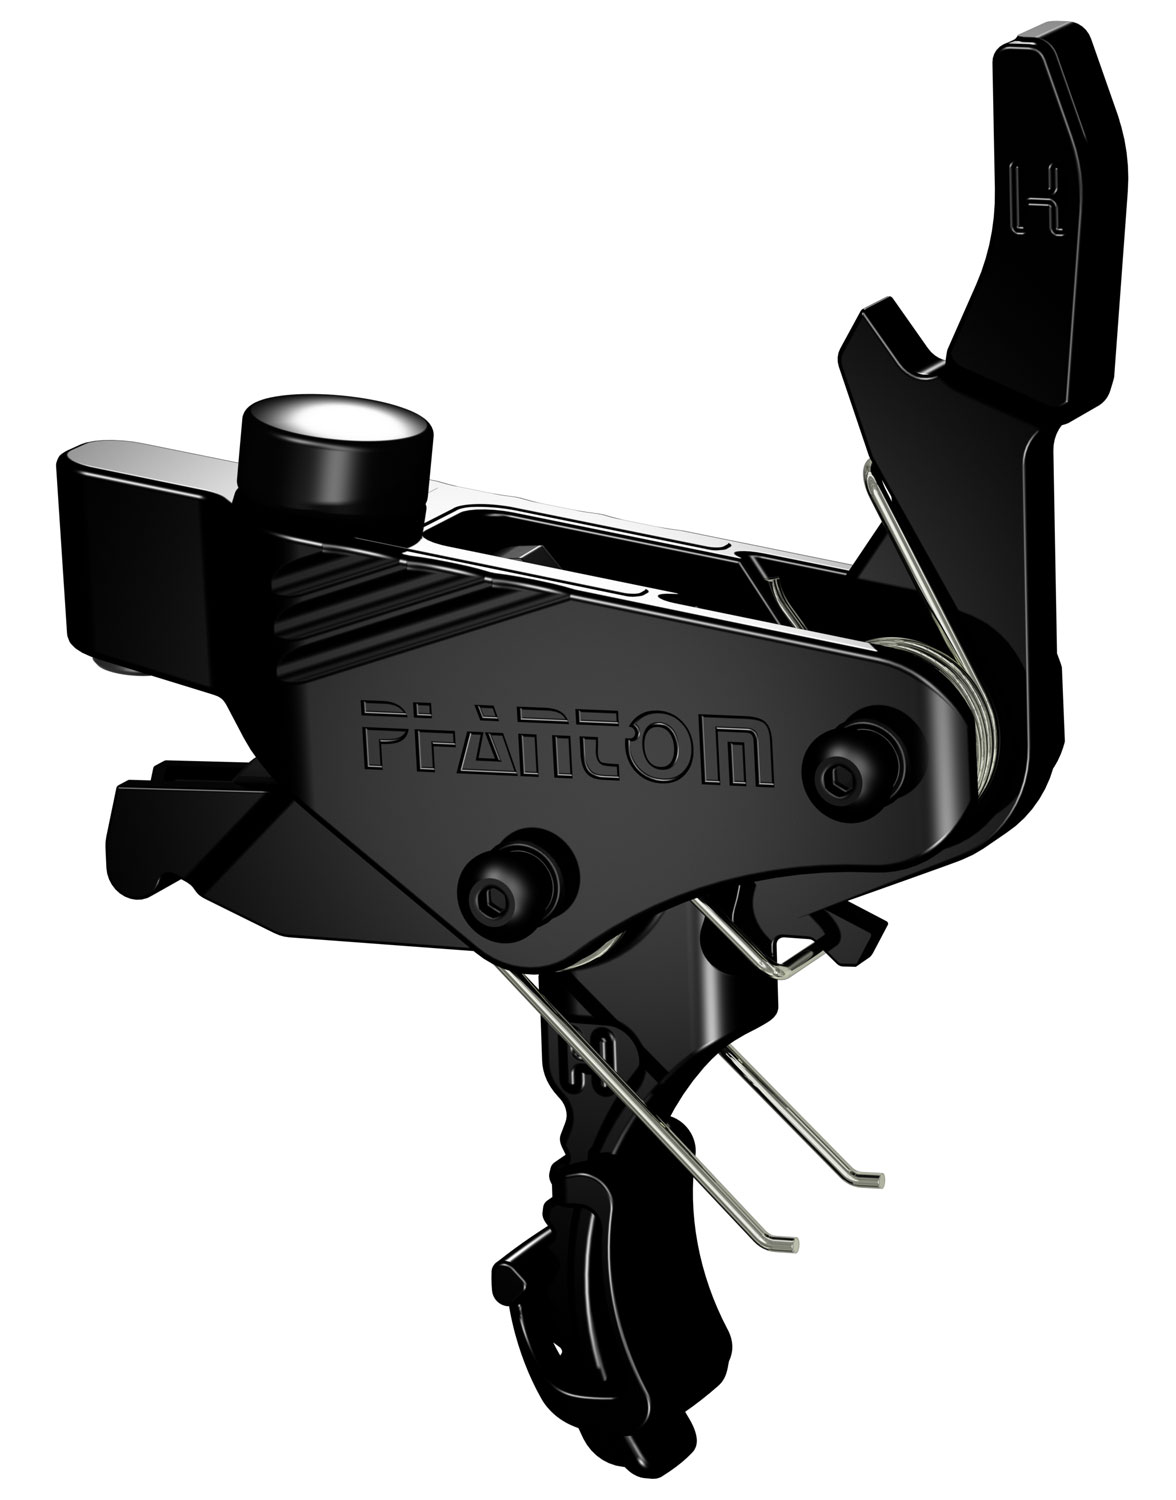 Hiperfire PDIBLK PDI  Single-Stage Curved Trigger with 2 lbs Draw Weight & Black Nitride Finish for AR-Platform